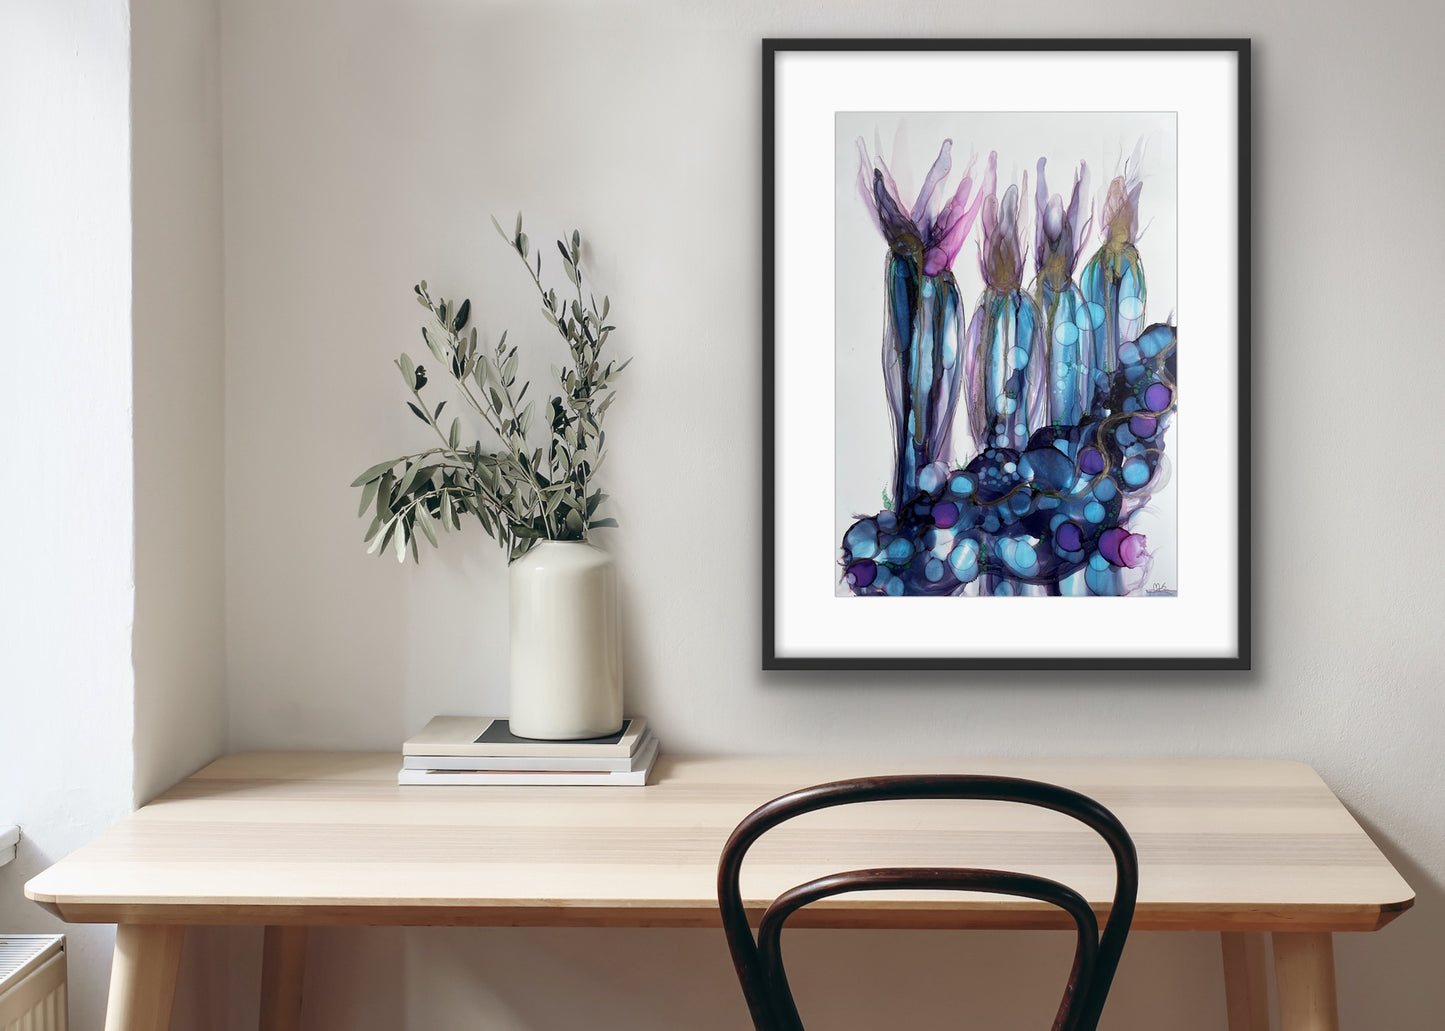 Night Blooming Cactus-Original abstract art with blue flowering cacti